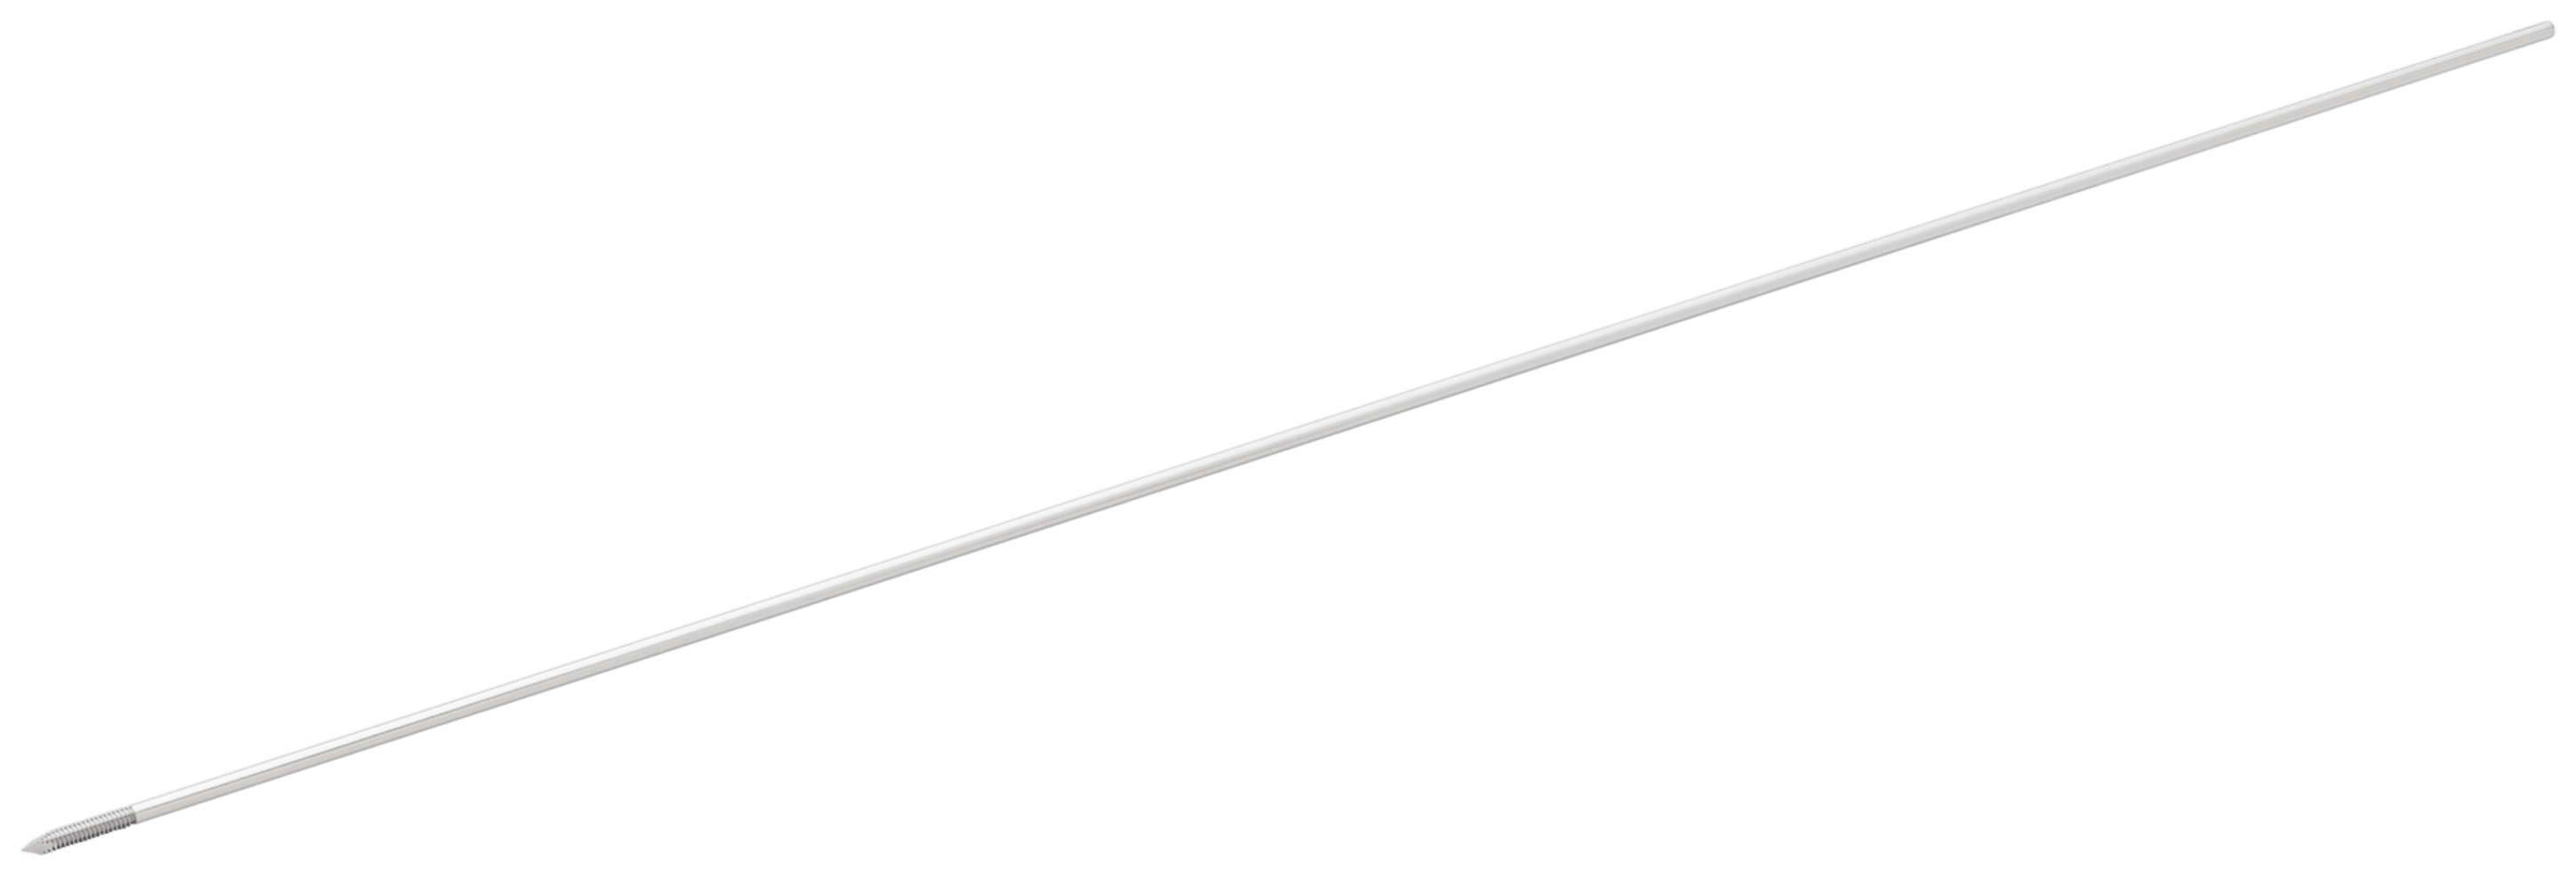 Guidewire with Trocar Tip, Threaded, 062" x 9.25" (1.6 mm x 235 mm)